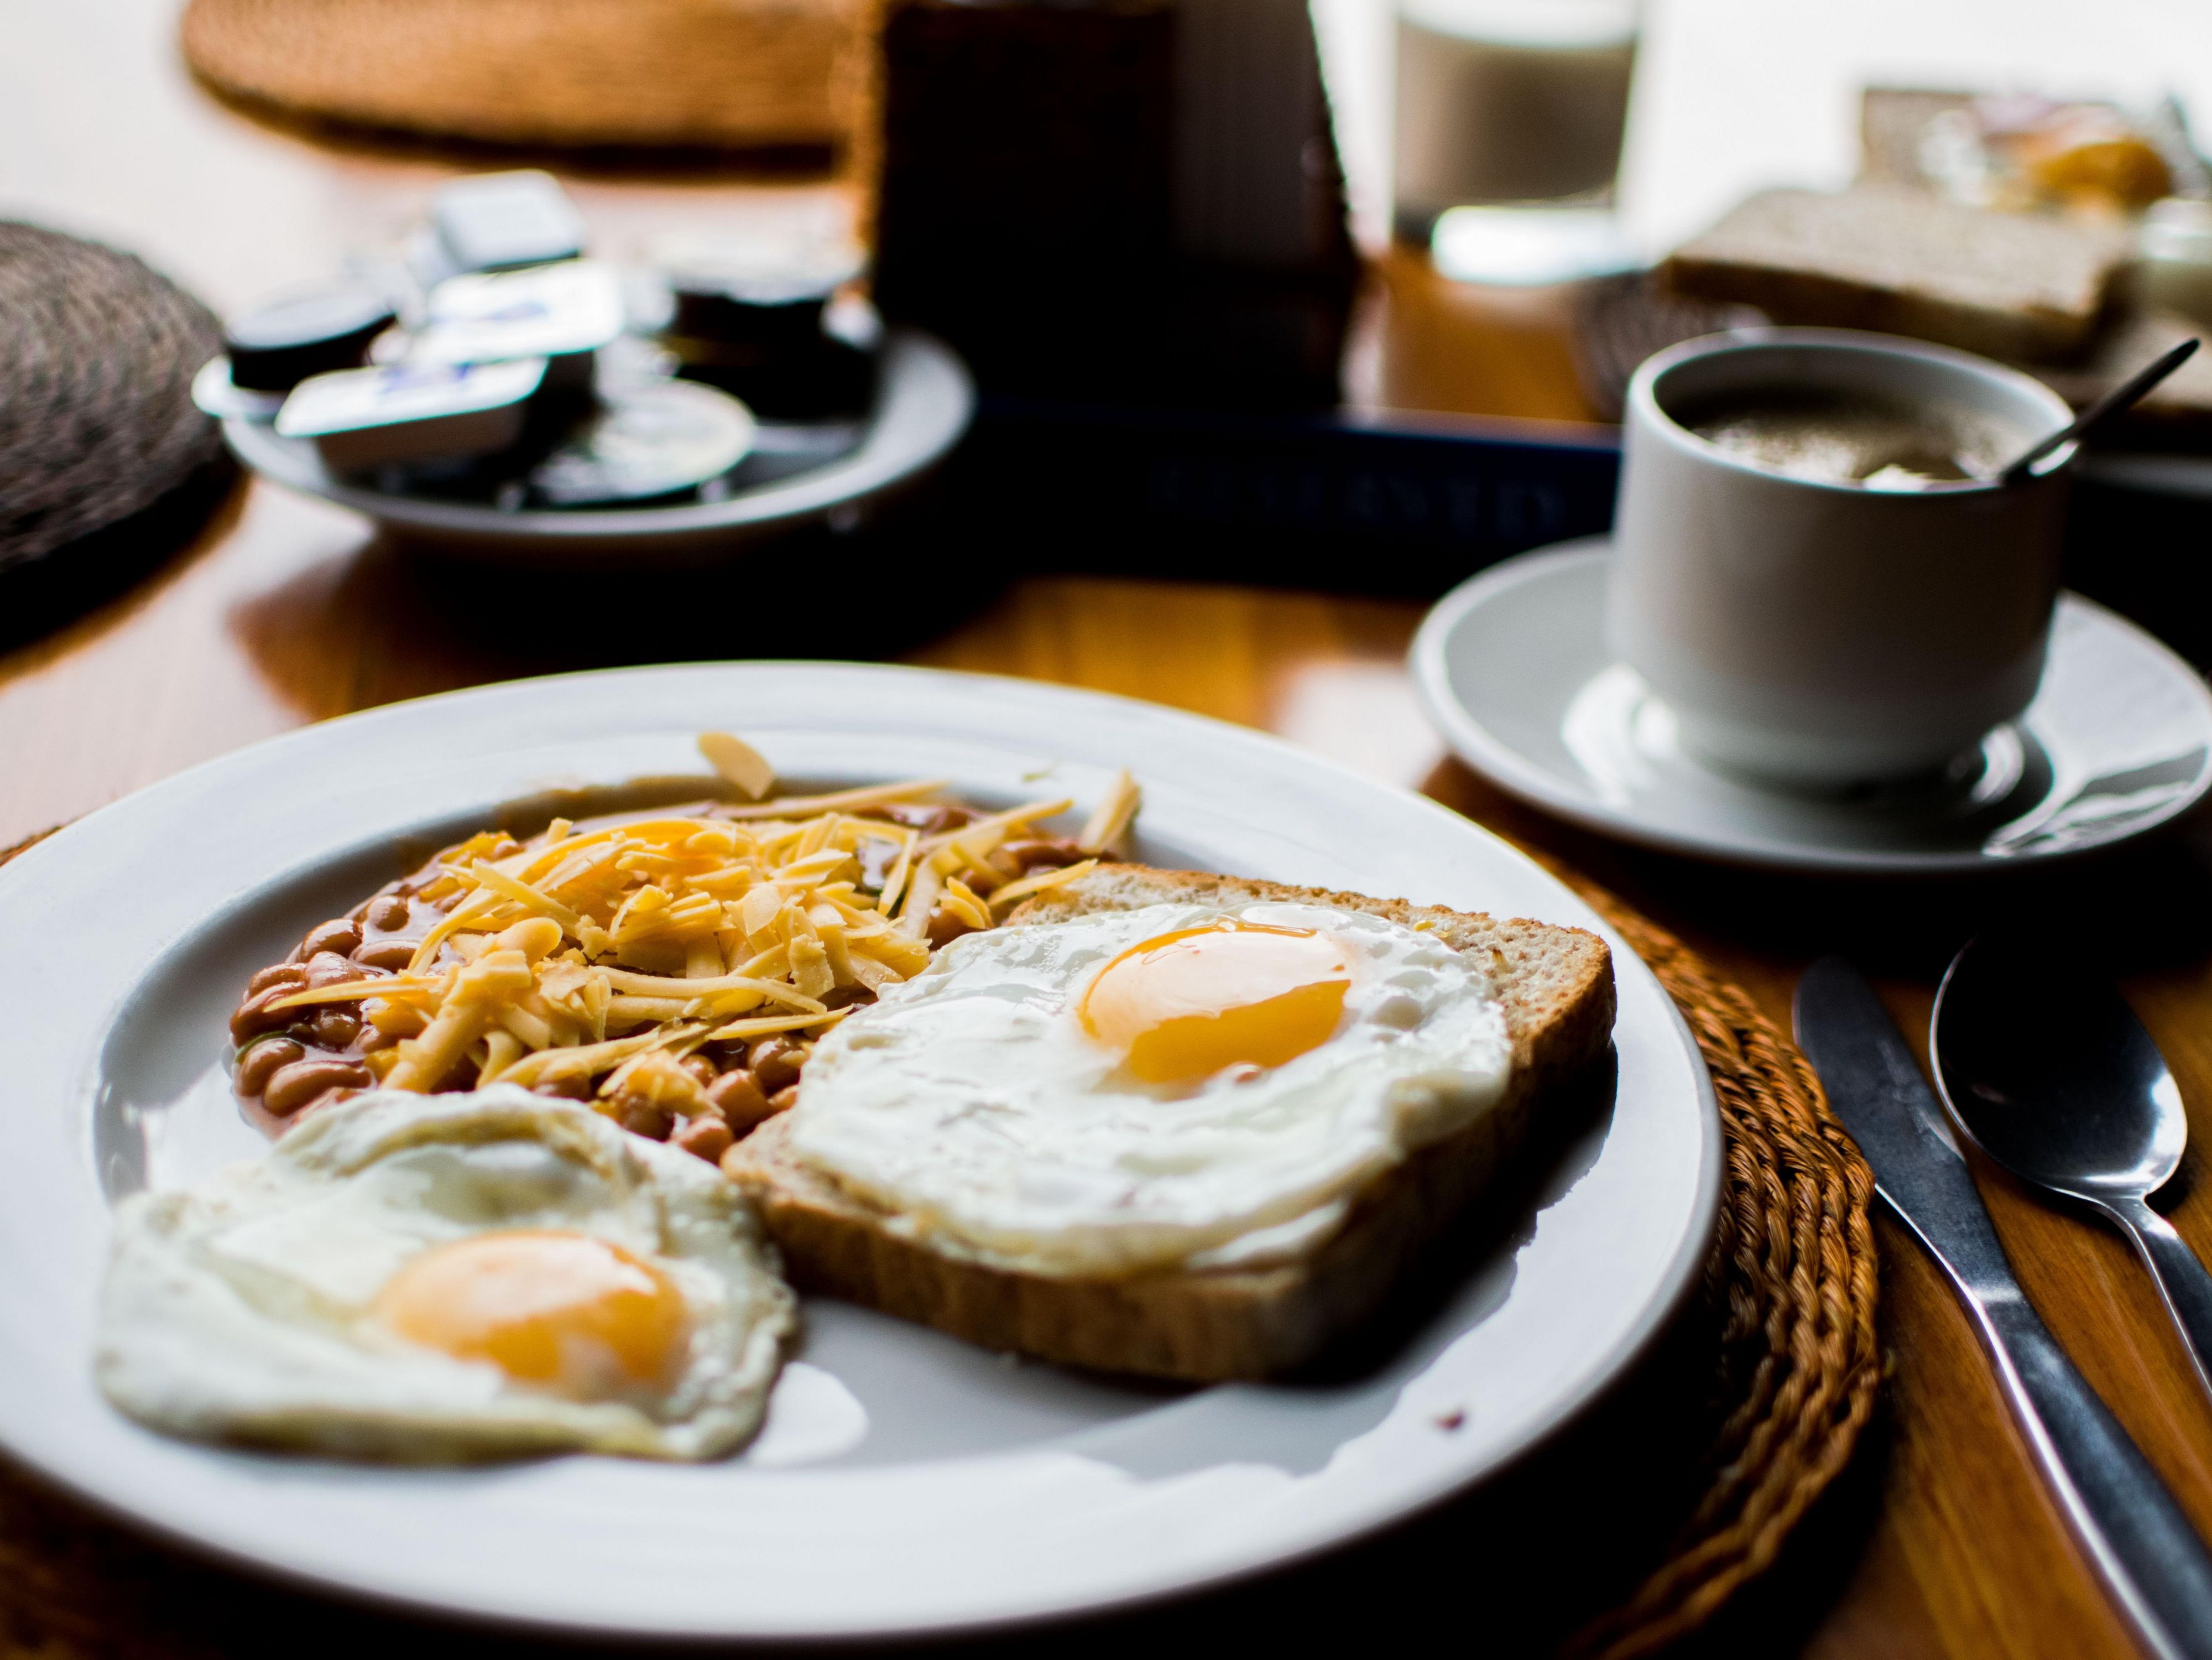 Book a Stay With Free Breakfast